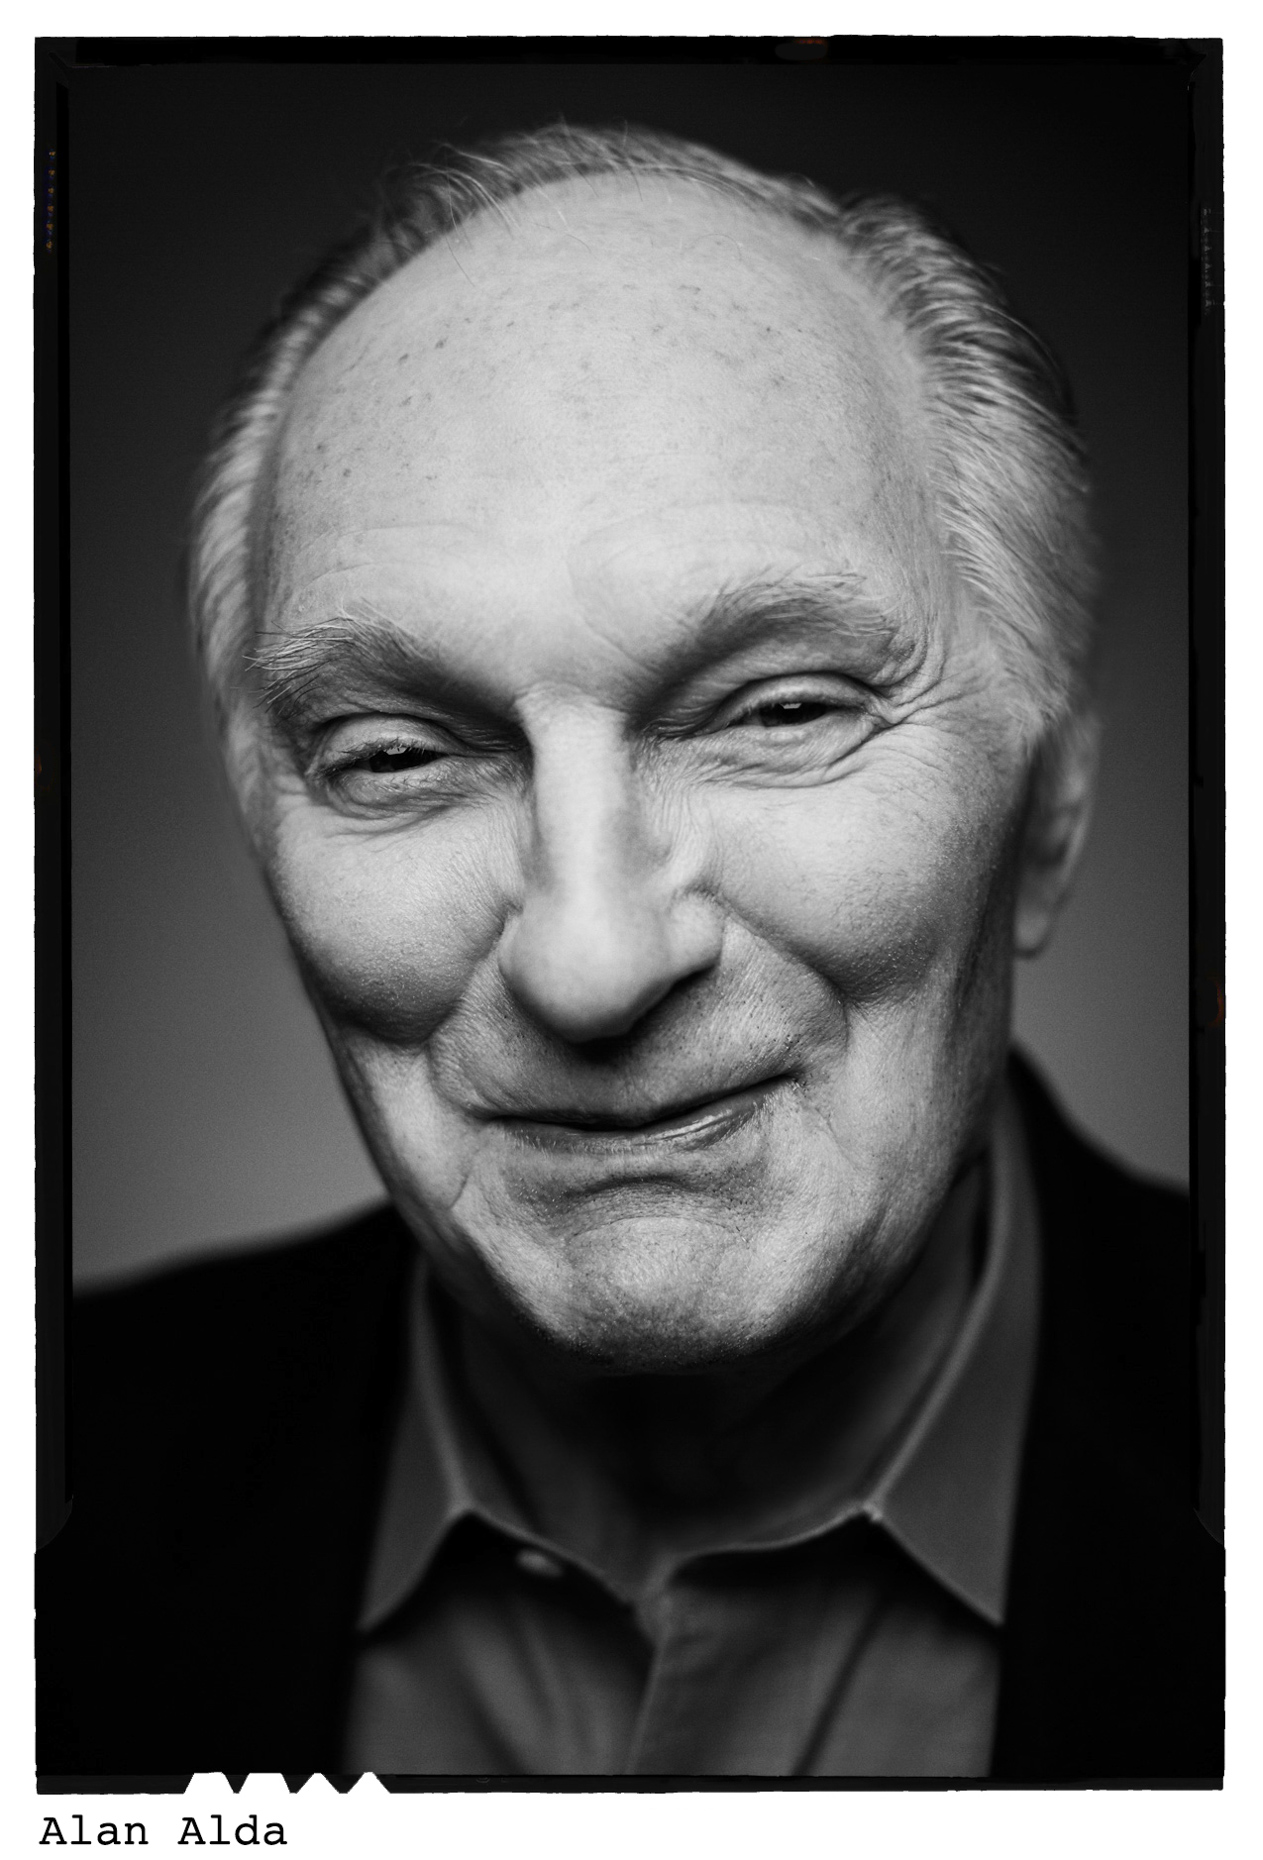 Alan Alda and Kathy Connell Portrait Session